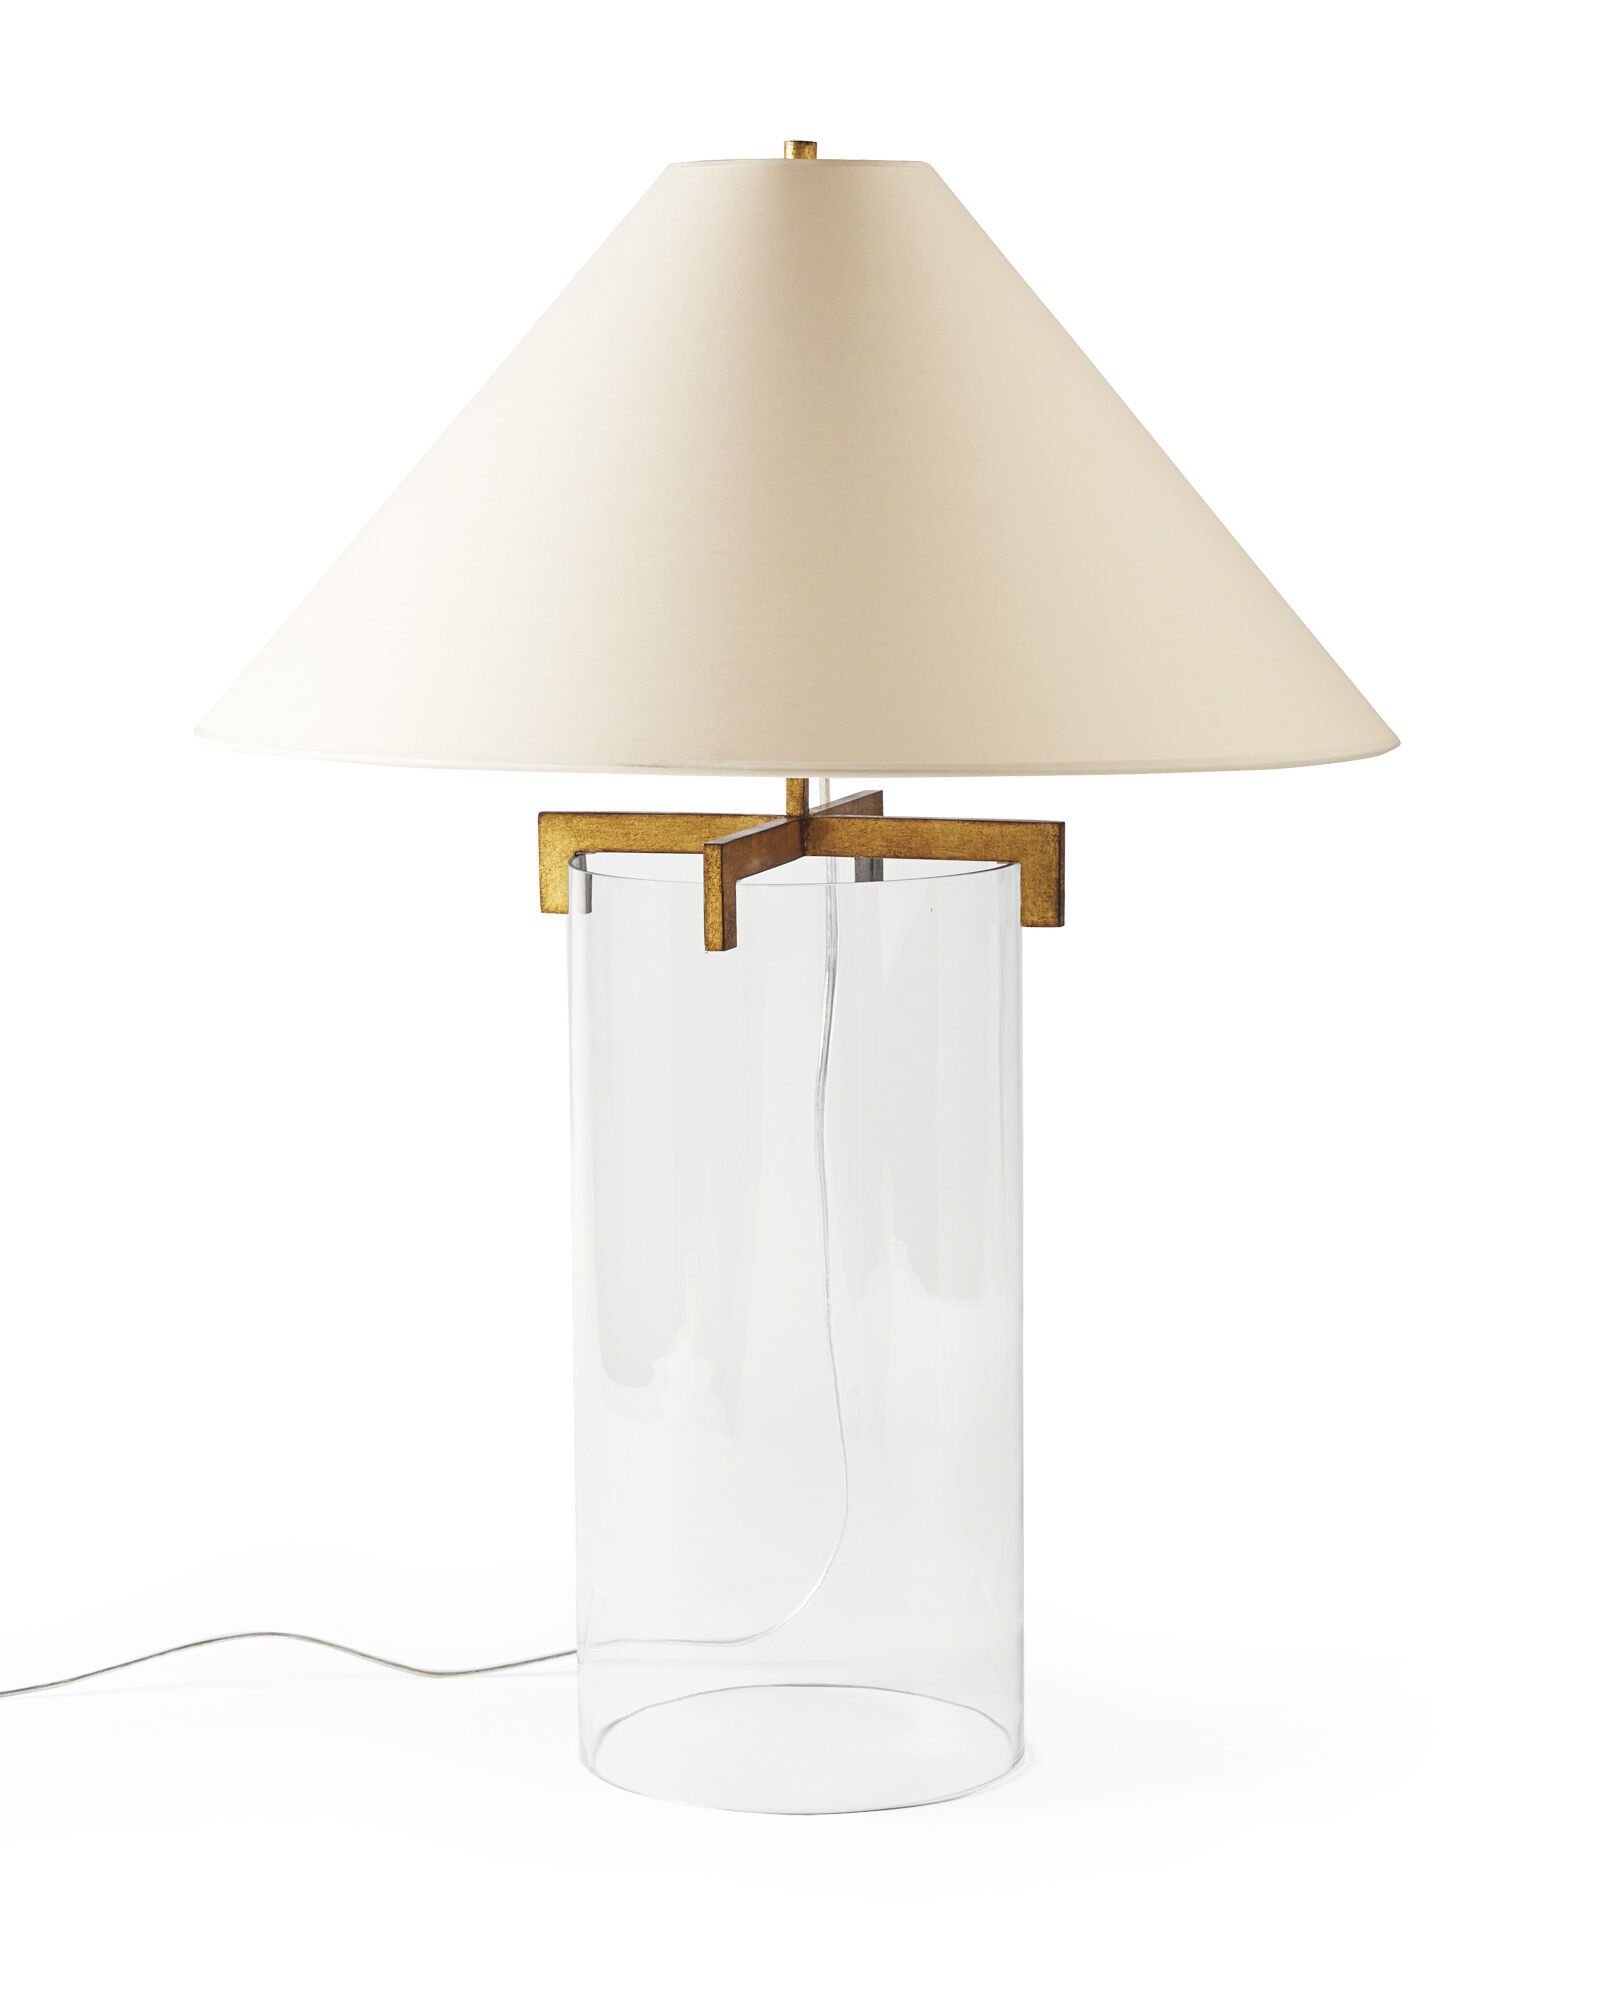 Brookline Table Lamp | Serena and Lily